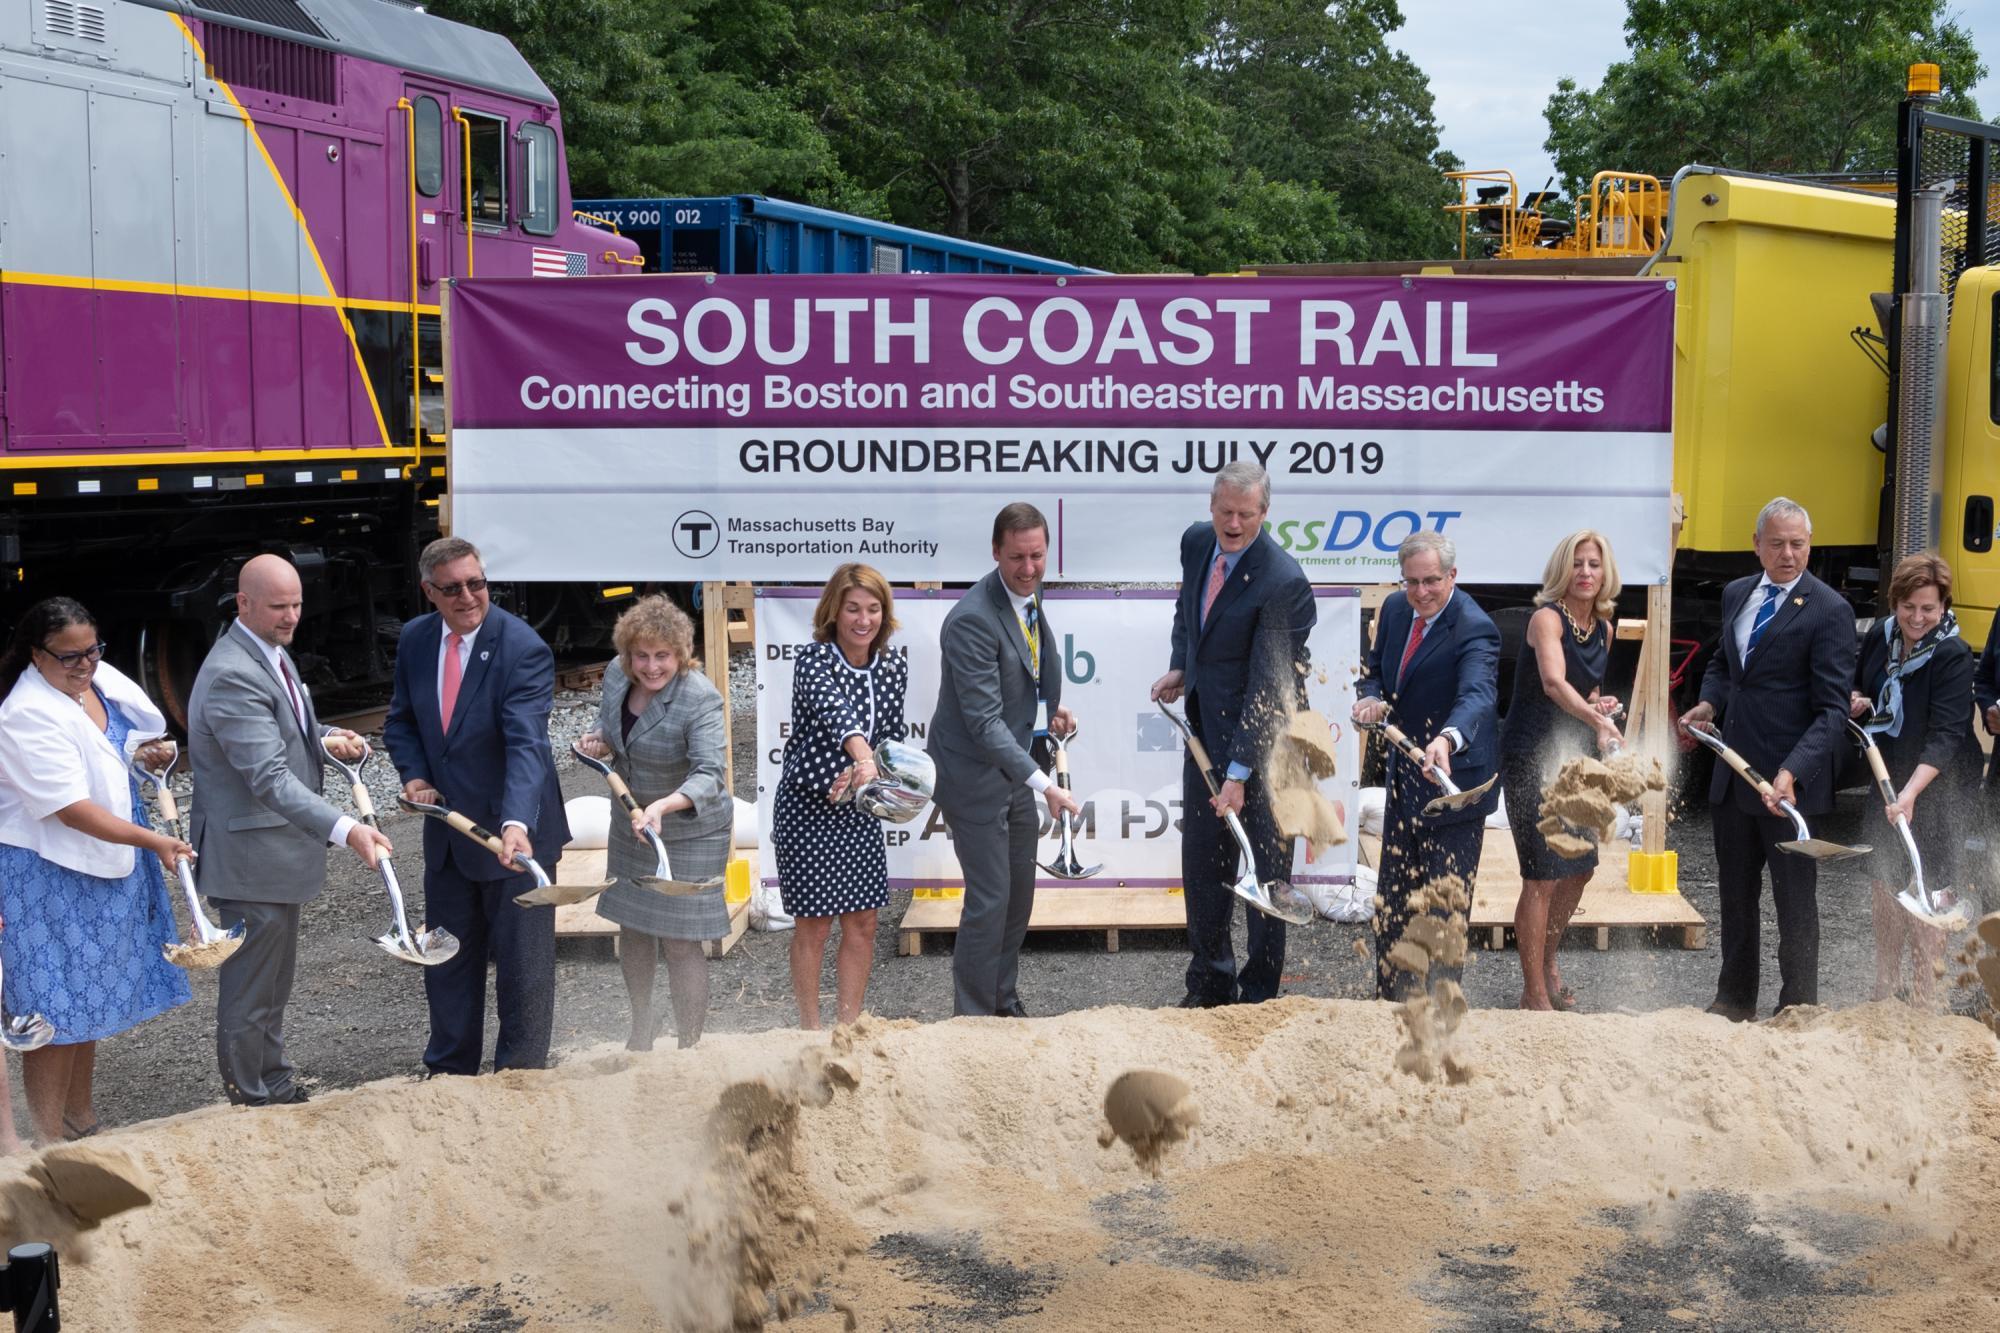 Officials with shovels at the groundbreaking of South Coast Rail